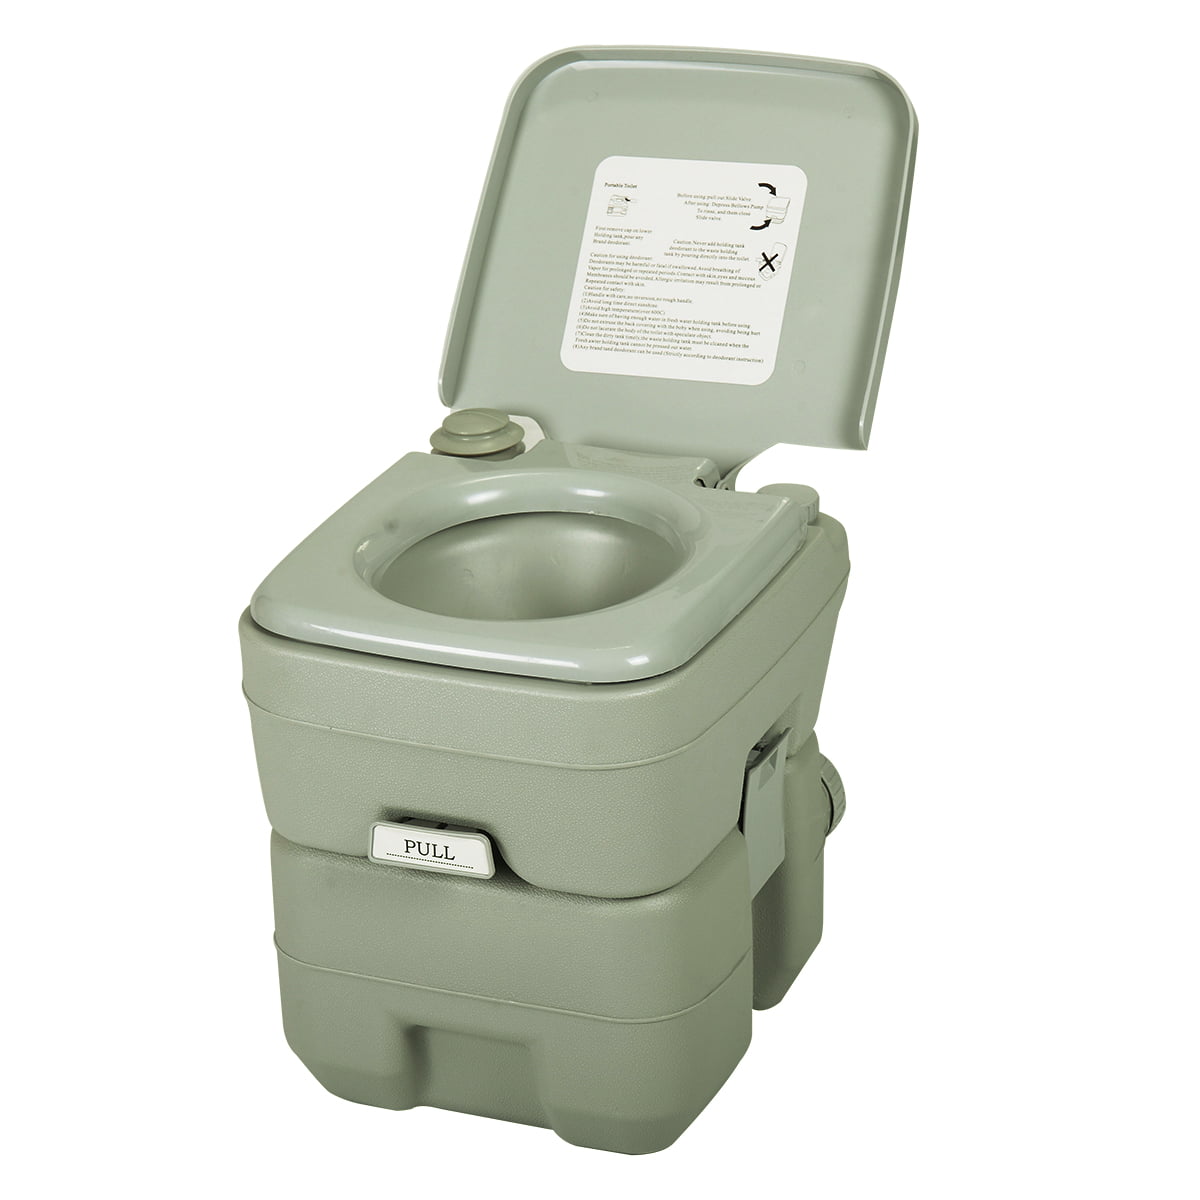 Green LAZYMOON Portable Toliet 5 Gallon 20L Outdoor Camping Toilet Potty